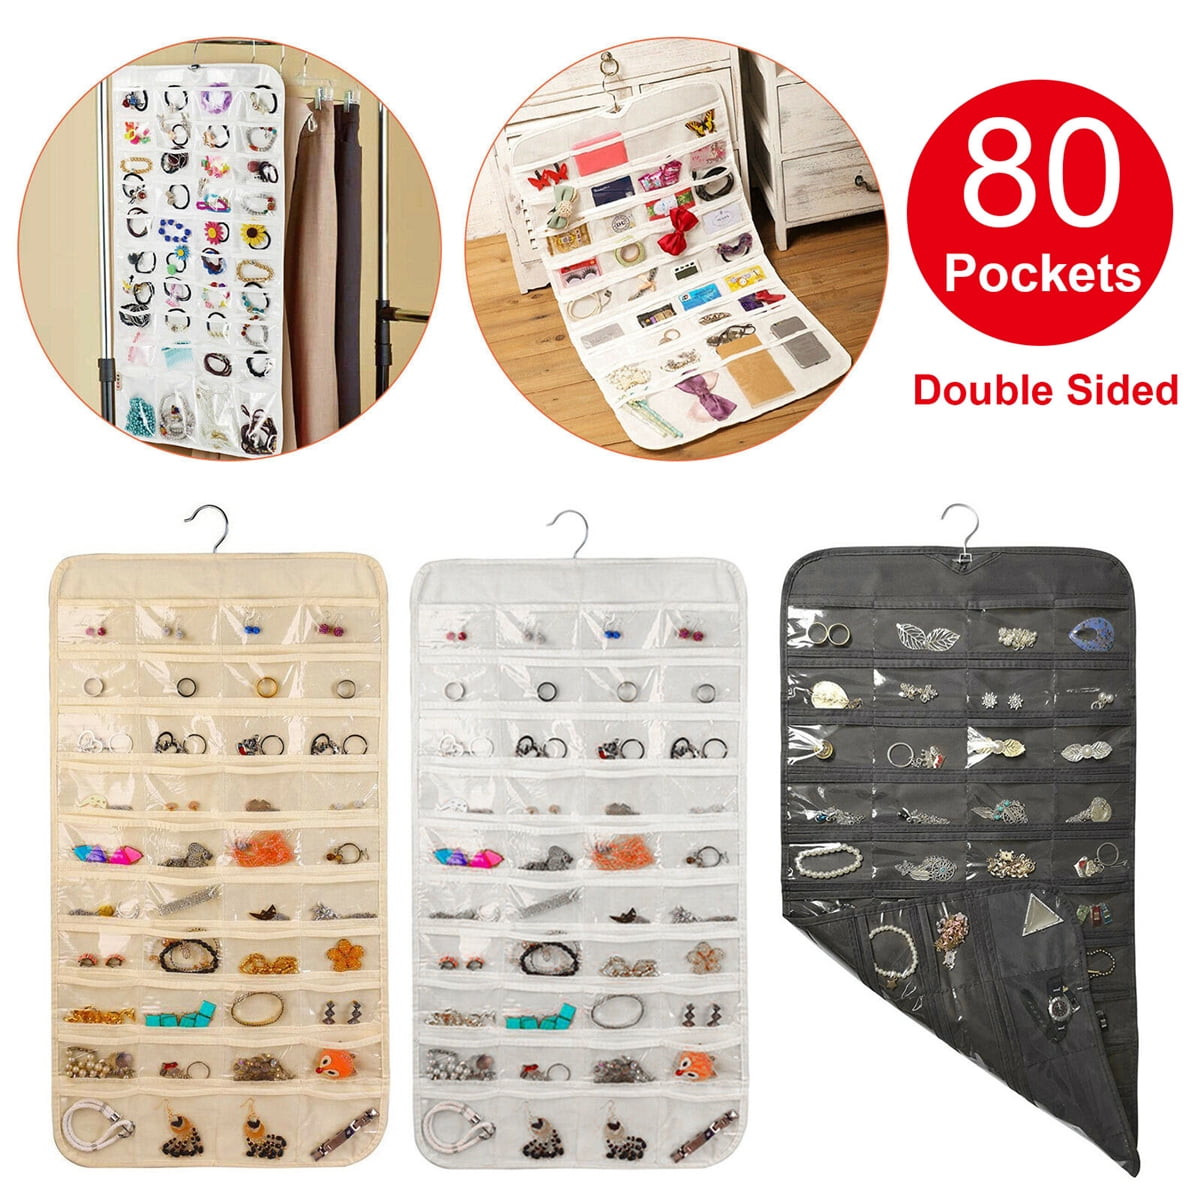 Jewelry Hanging Storage Organizer 80 Pocket Holder Earring Display Pouch Bag New 